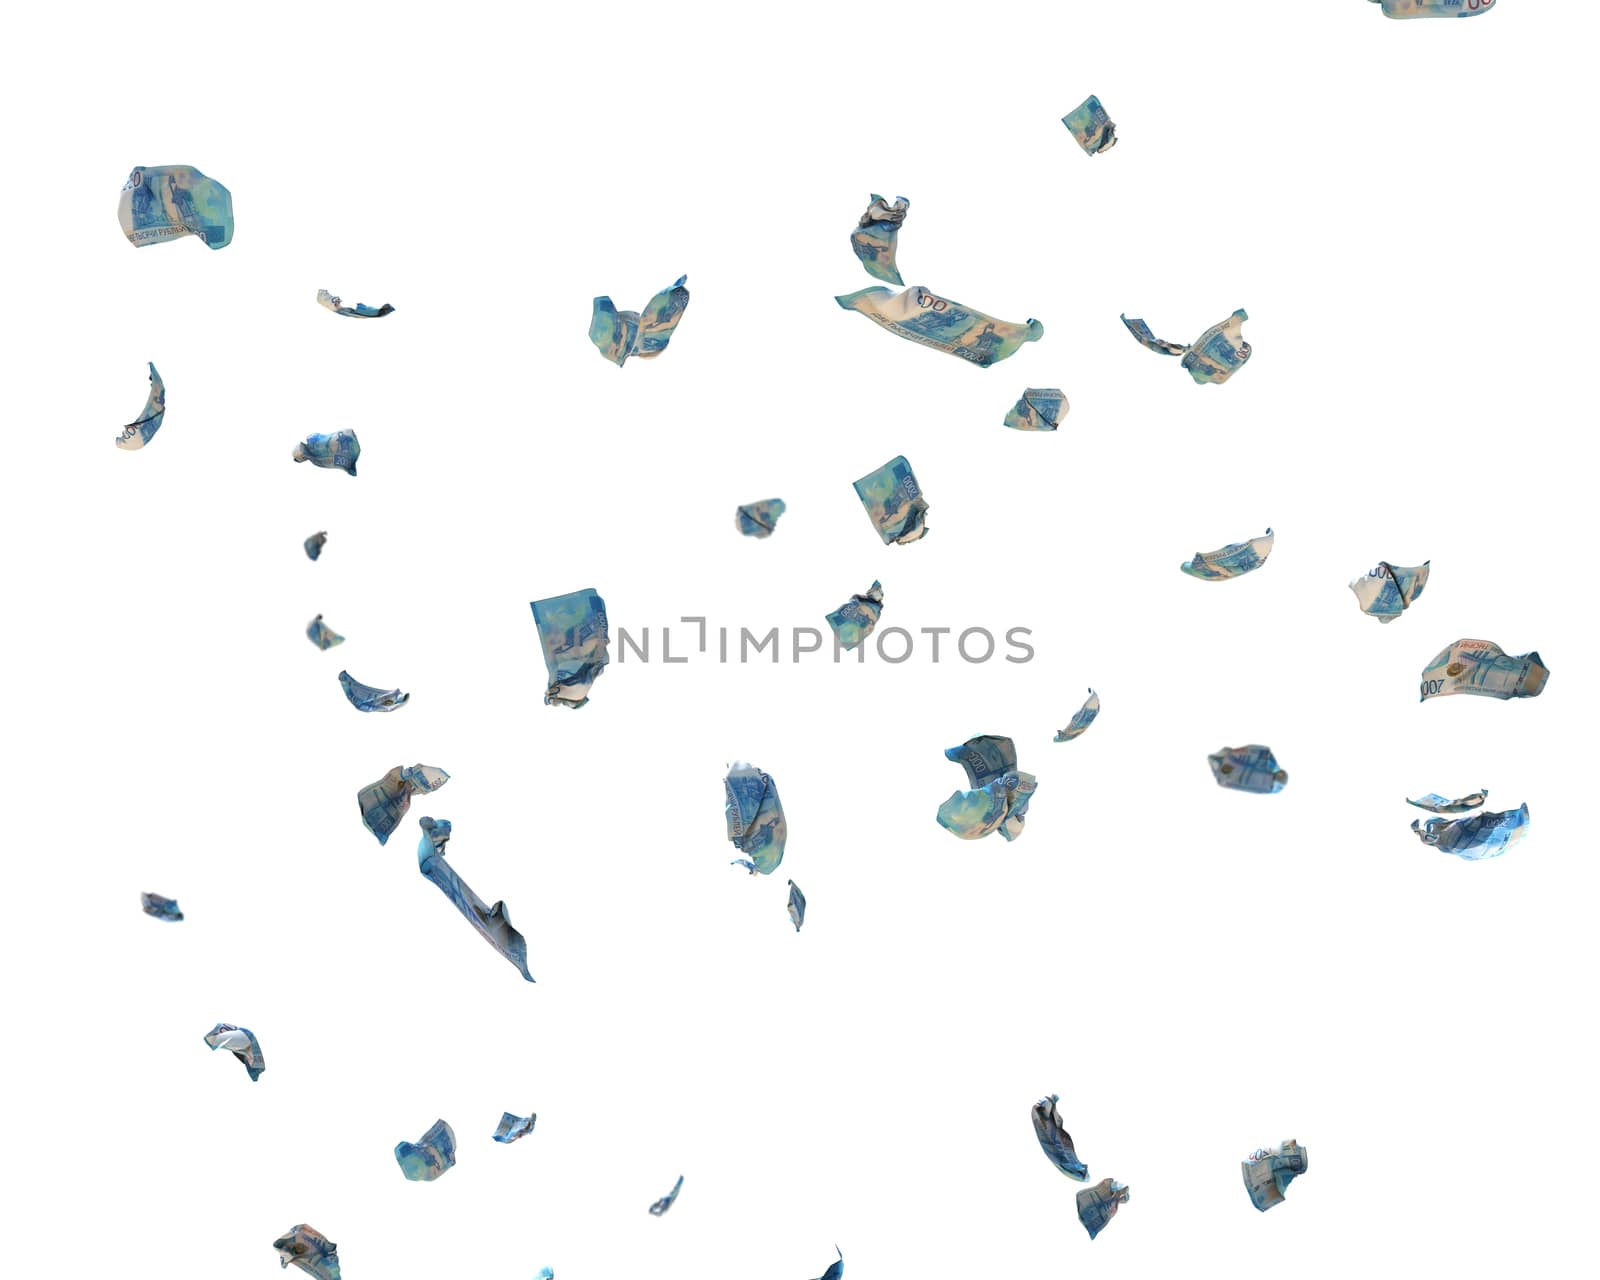 1000 Russian Ruble Currency Crumpled Banknotes flying, against w by pixelfootage